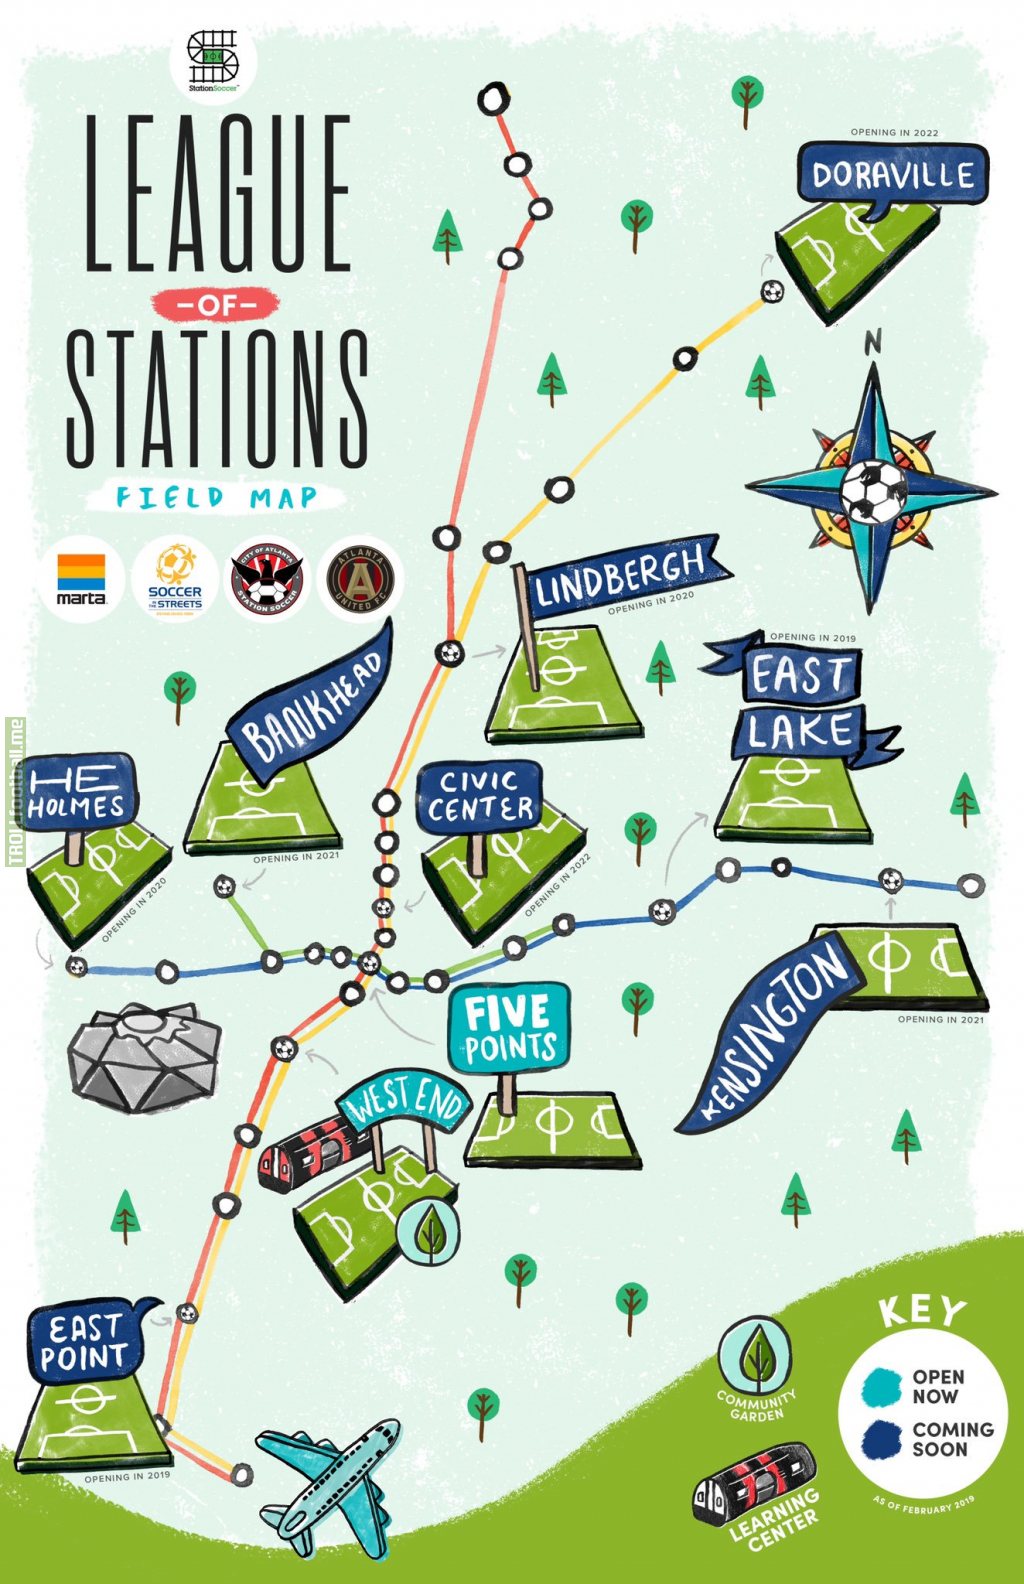 The League of Stations Field Map, presented by MARTA, Soccer in the Streets, the City of Atlanta, and Atlanta United FC